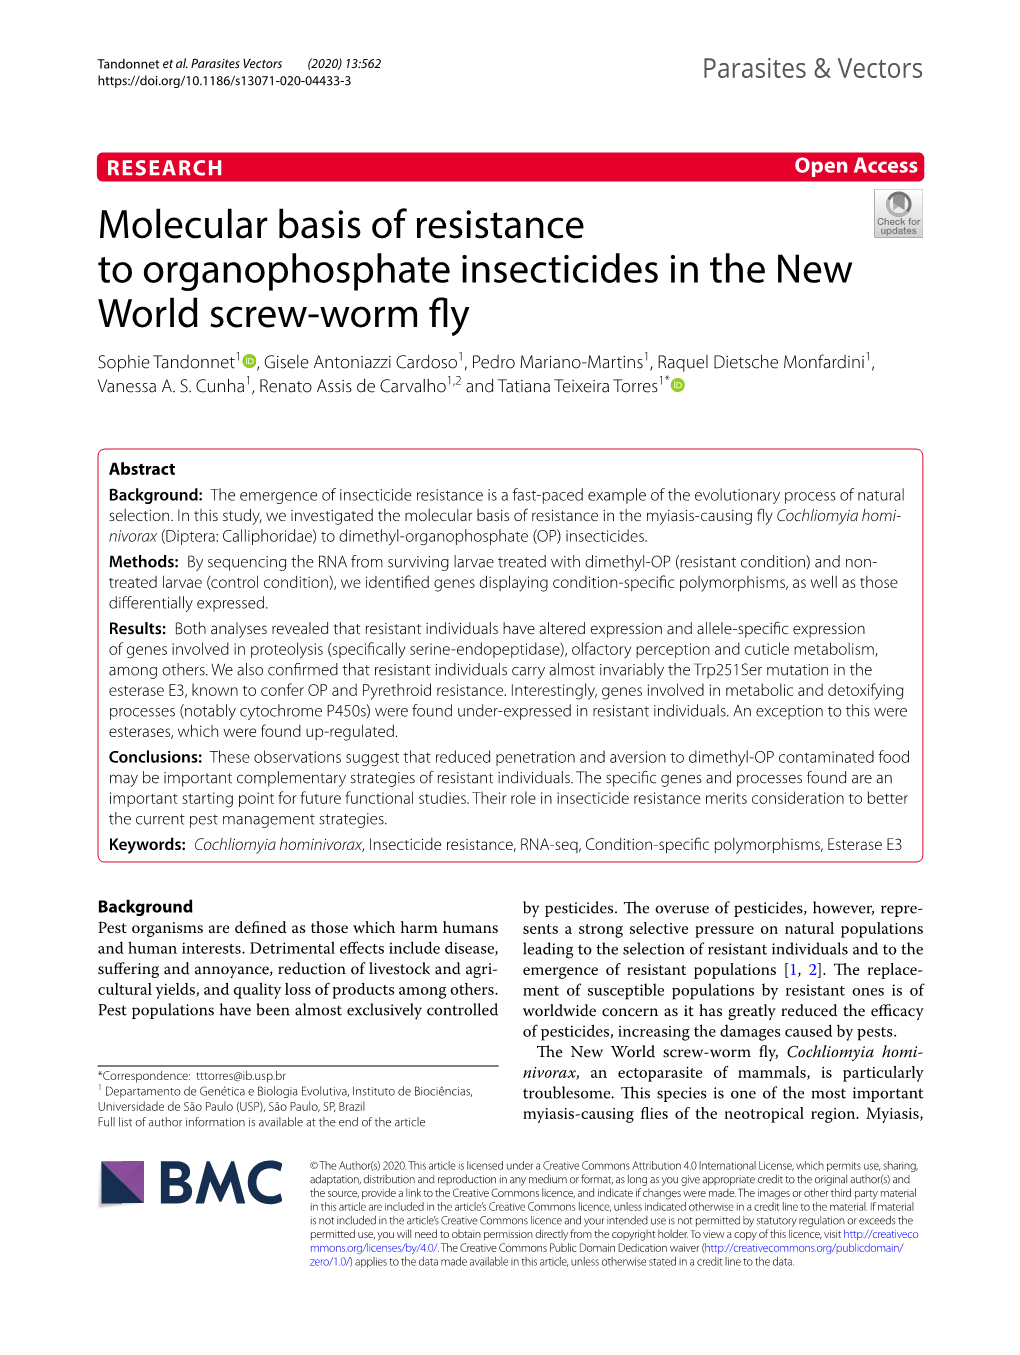 Molecular Basis of Resistance to Organophosphate Insecticides In